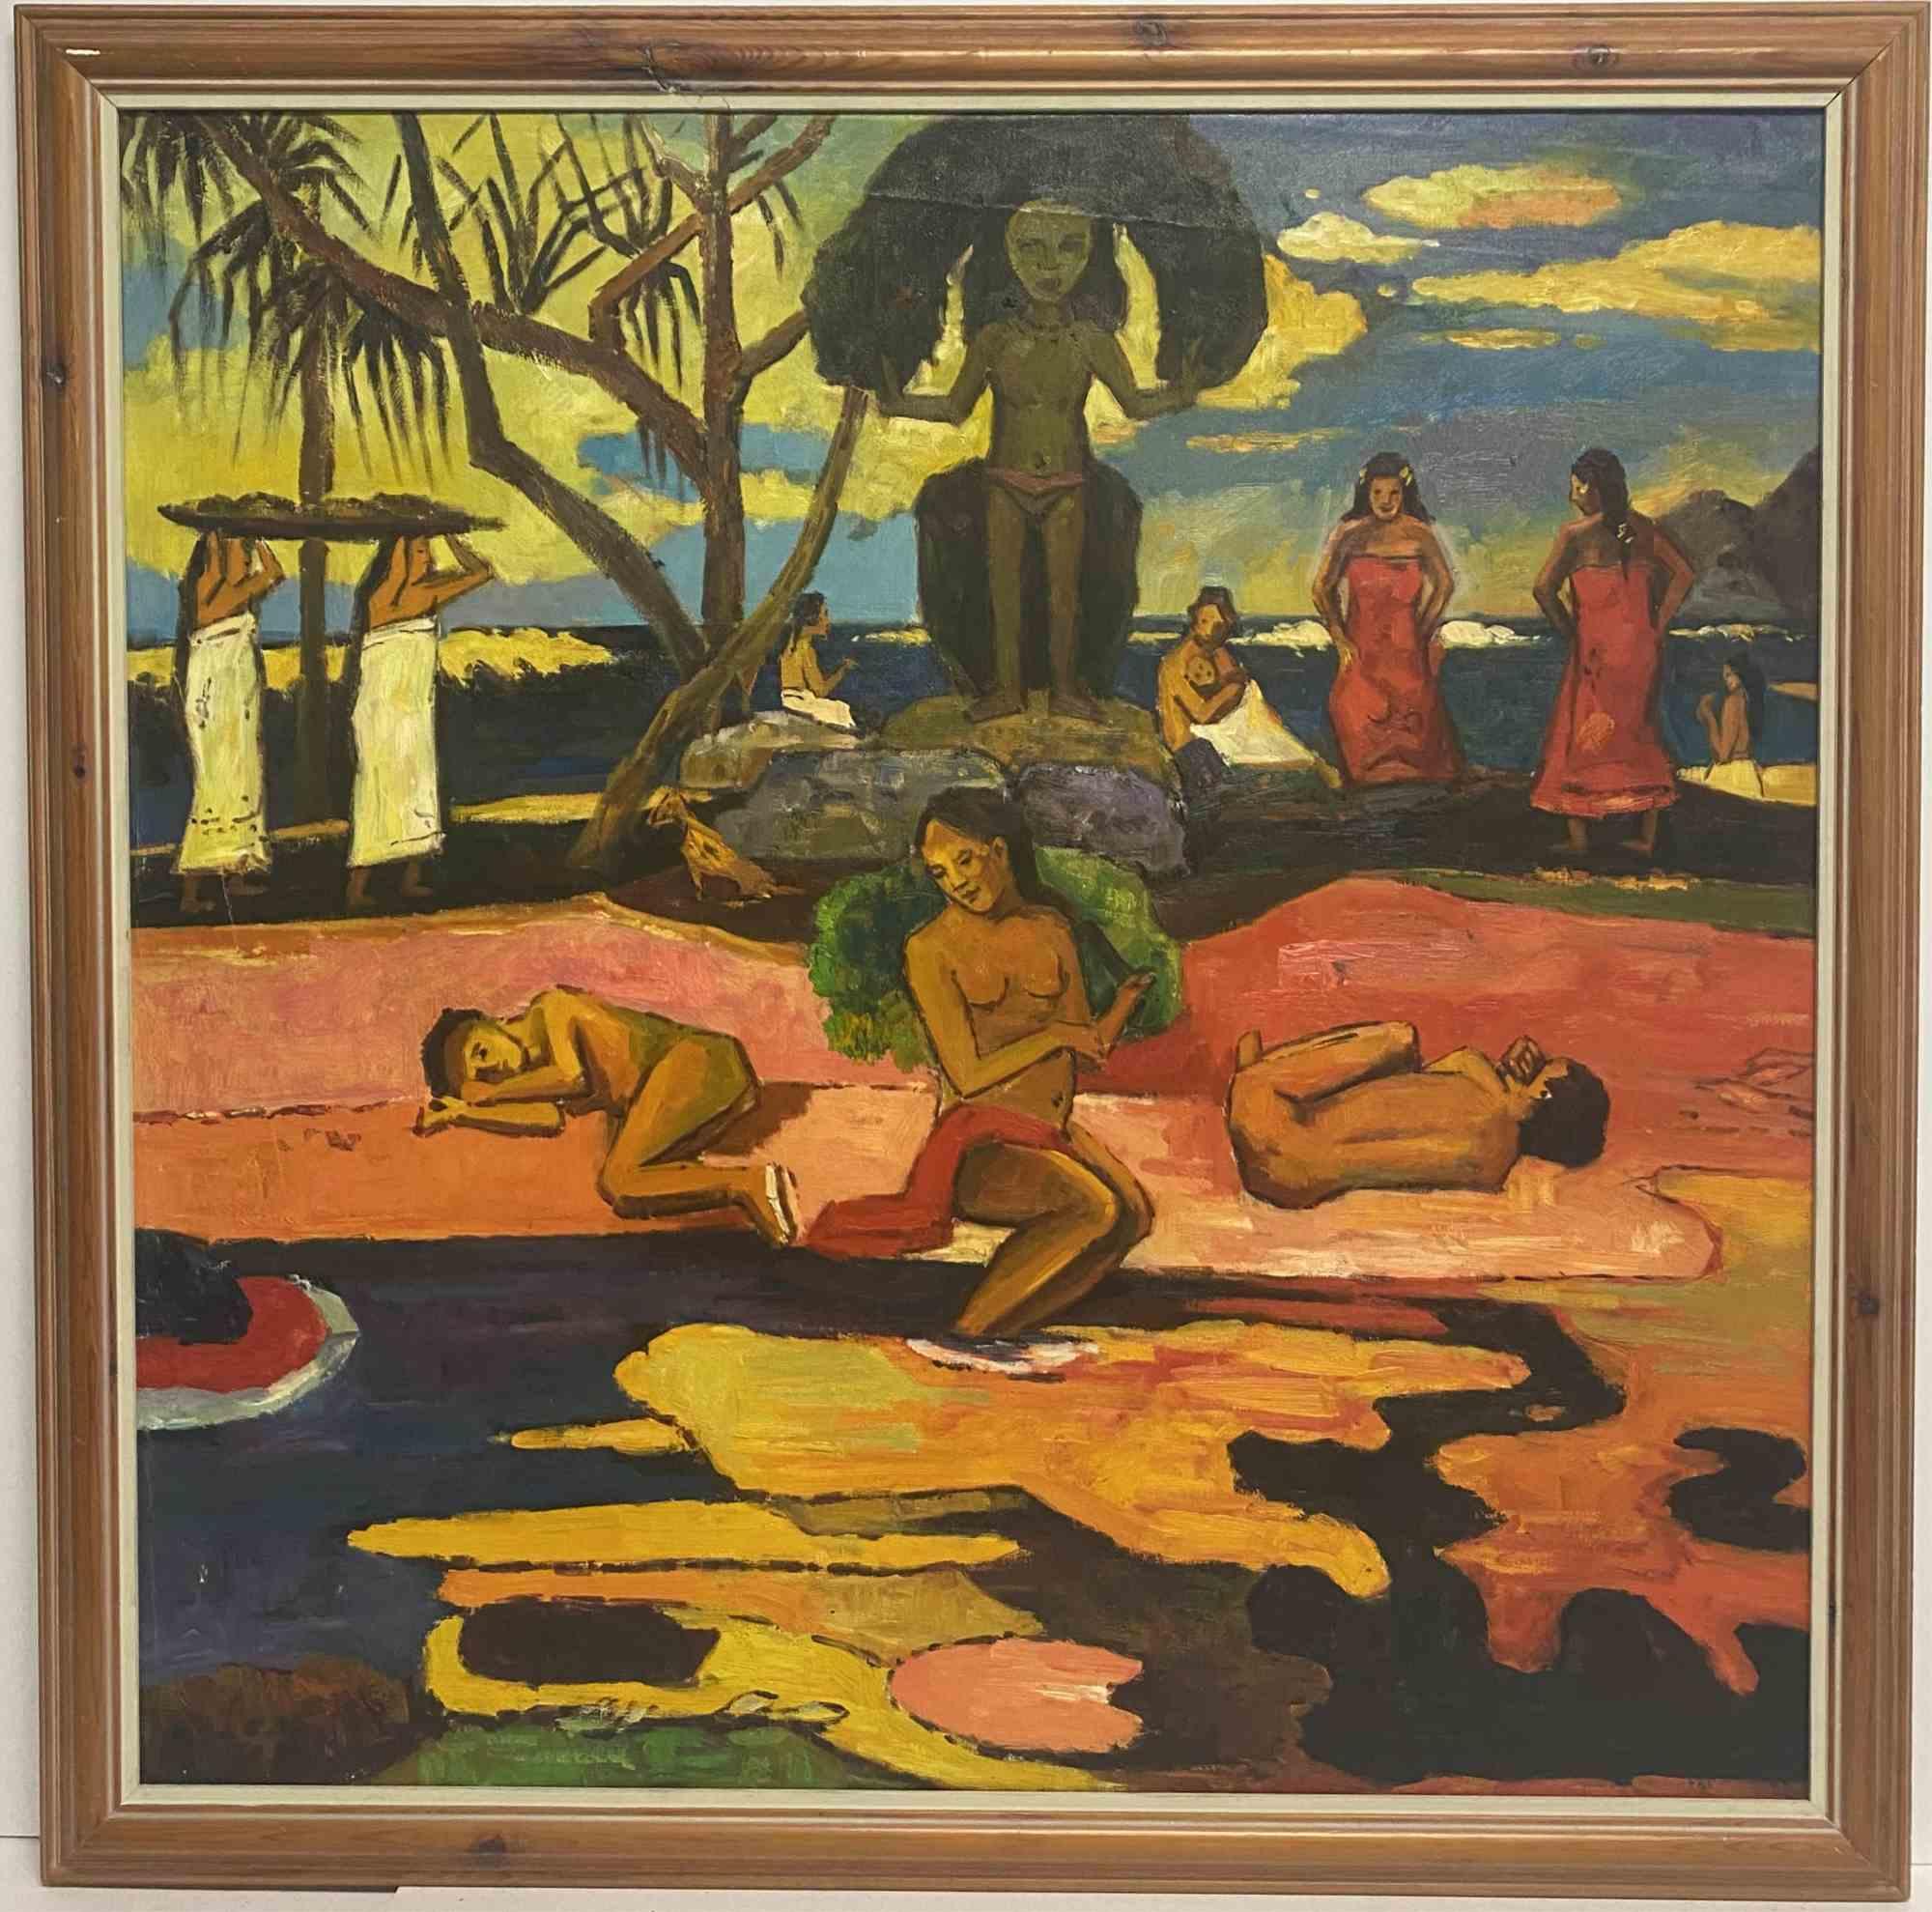 OIL ON CANVAS IN THE STYLE OF GAUGUIN